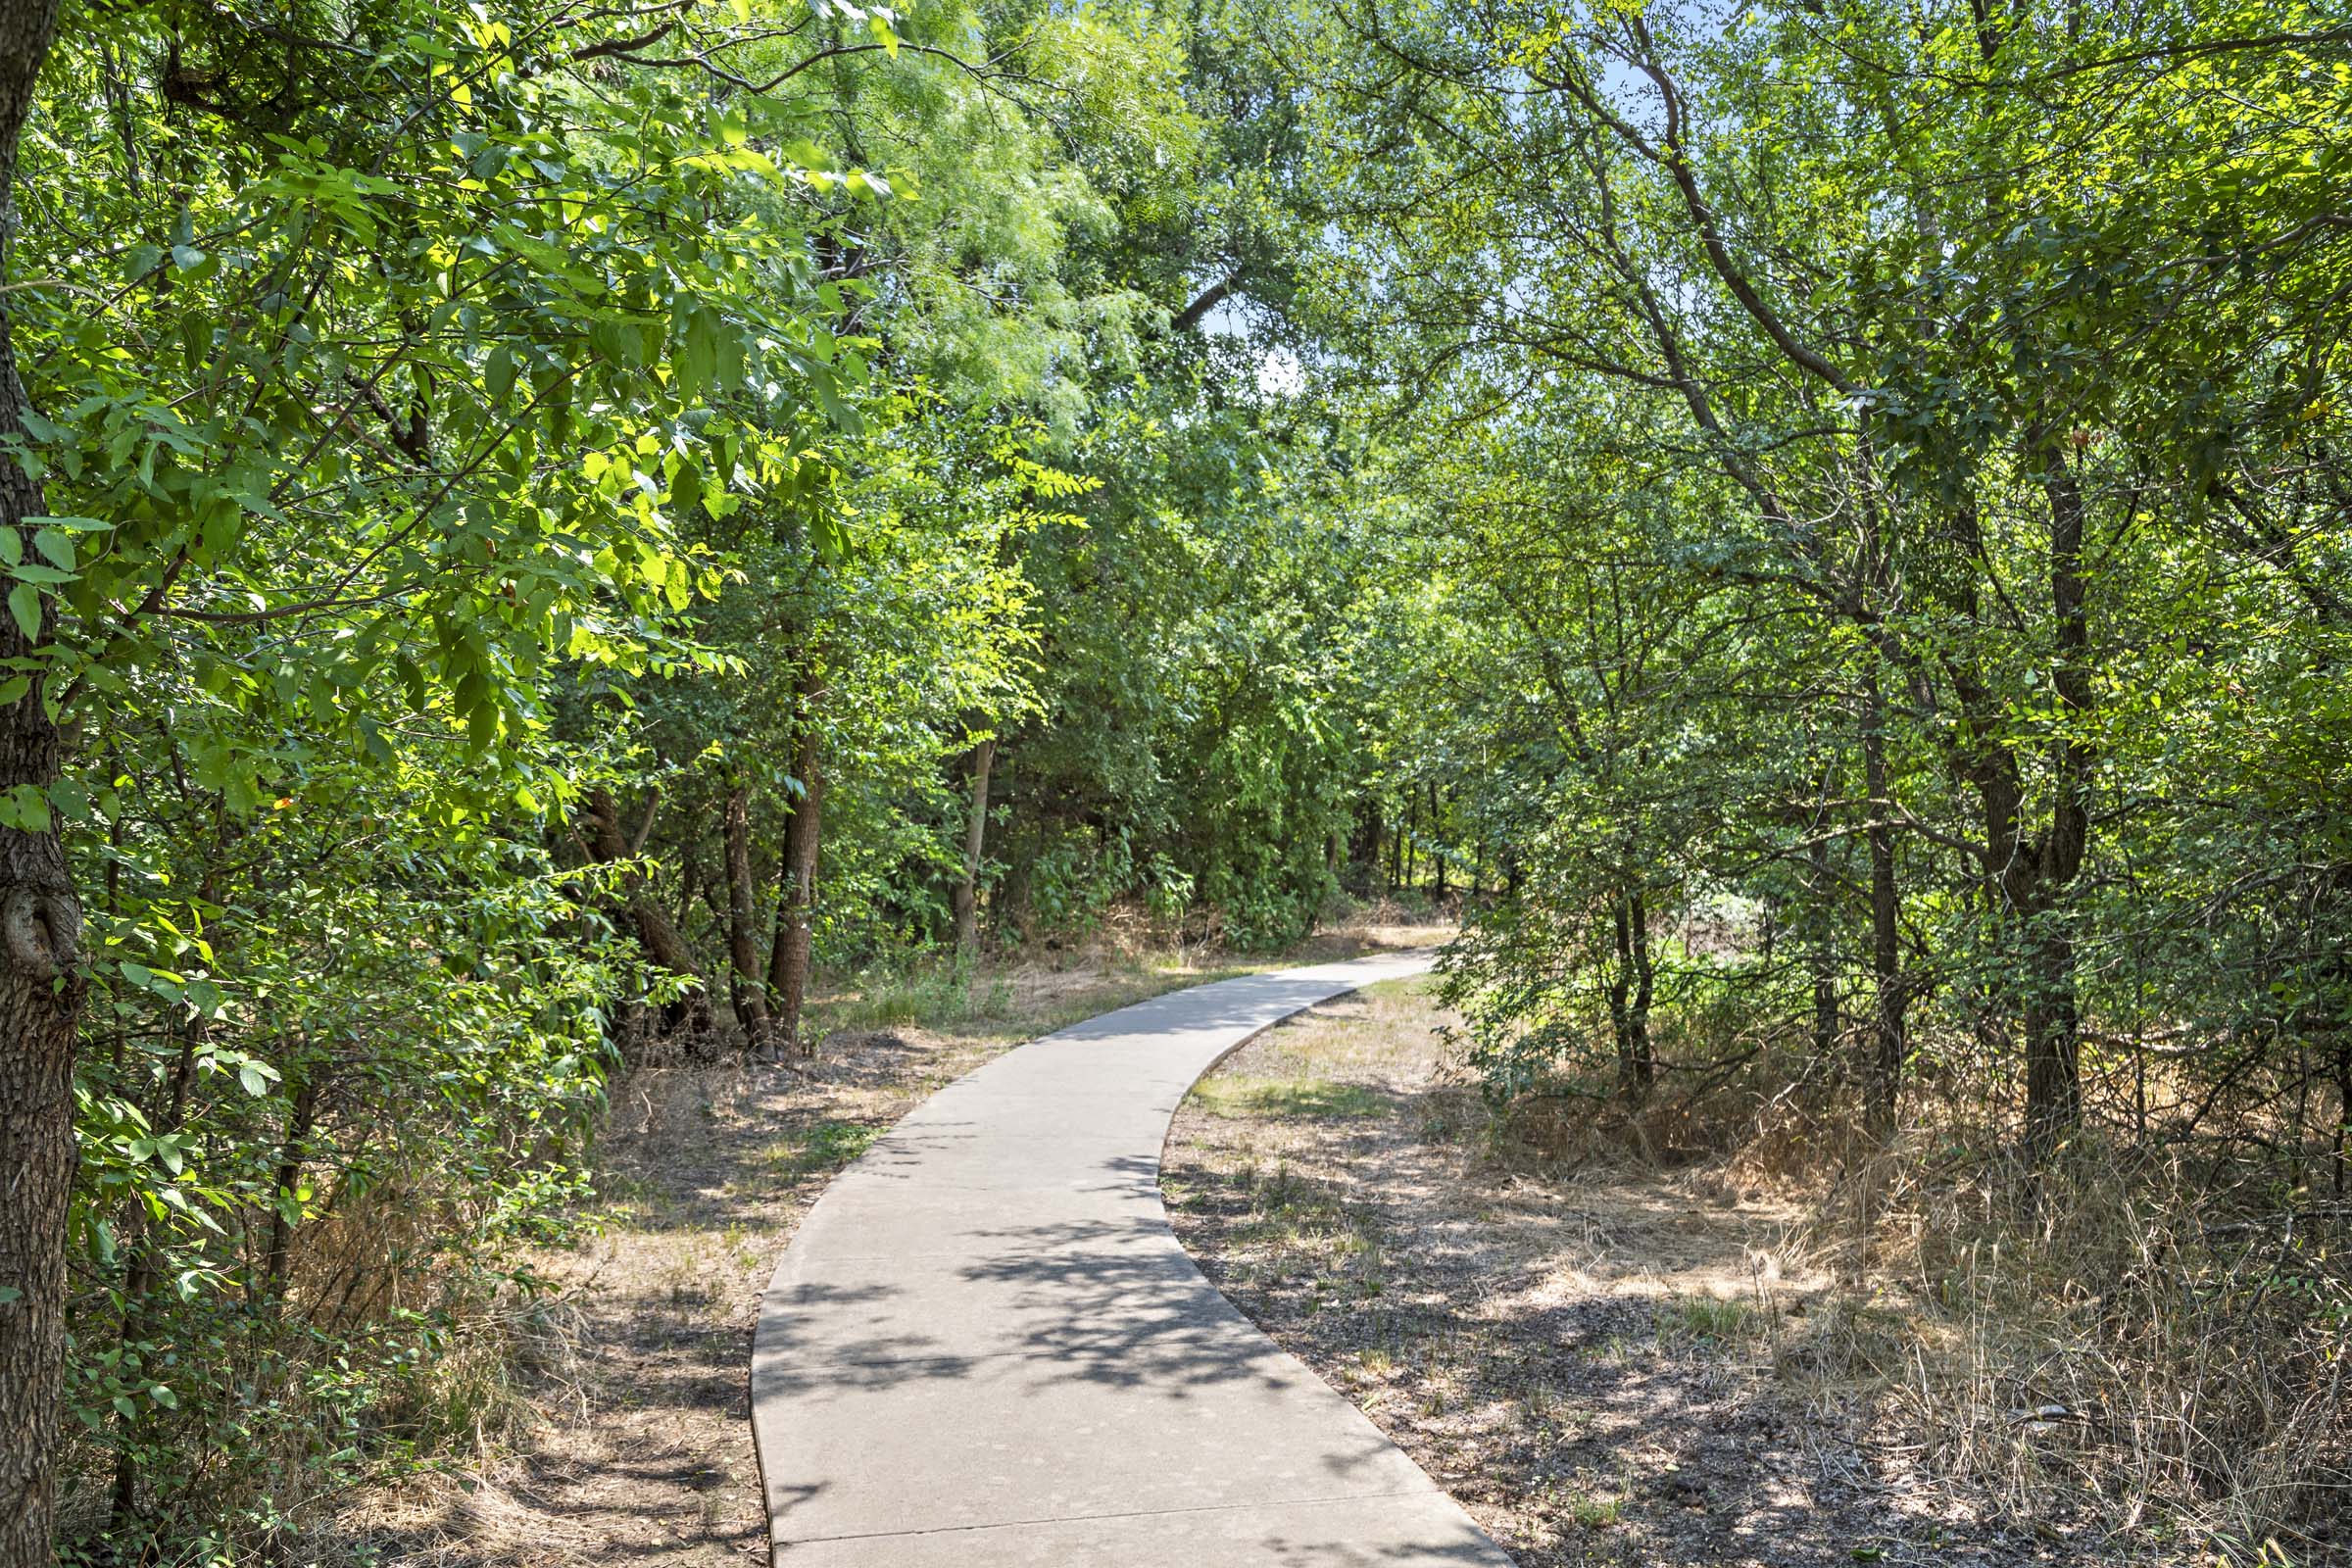 Walking trail connected to the community surrounded by wooded greenspace